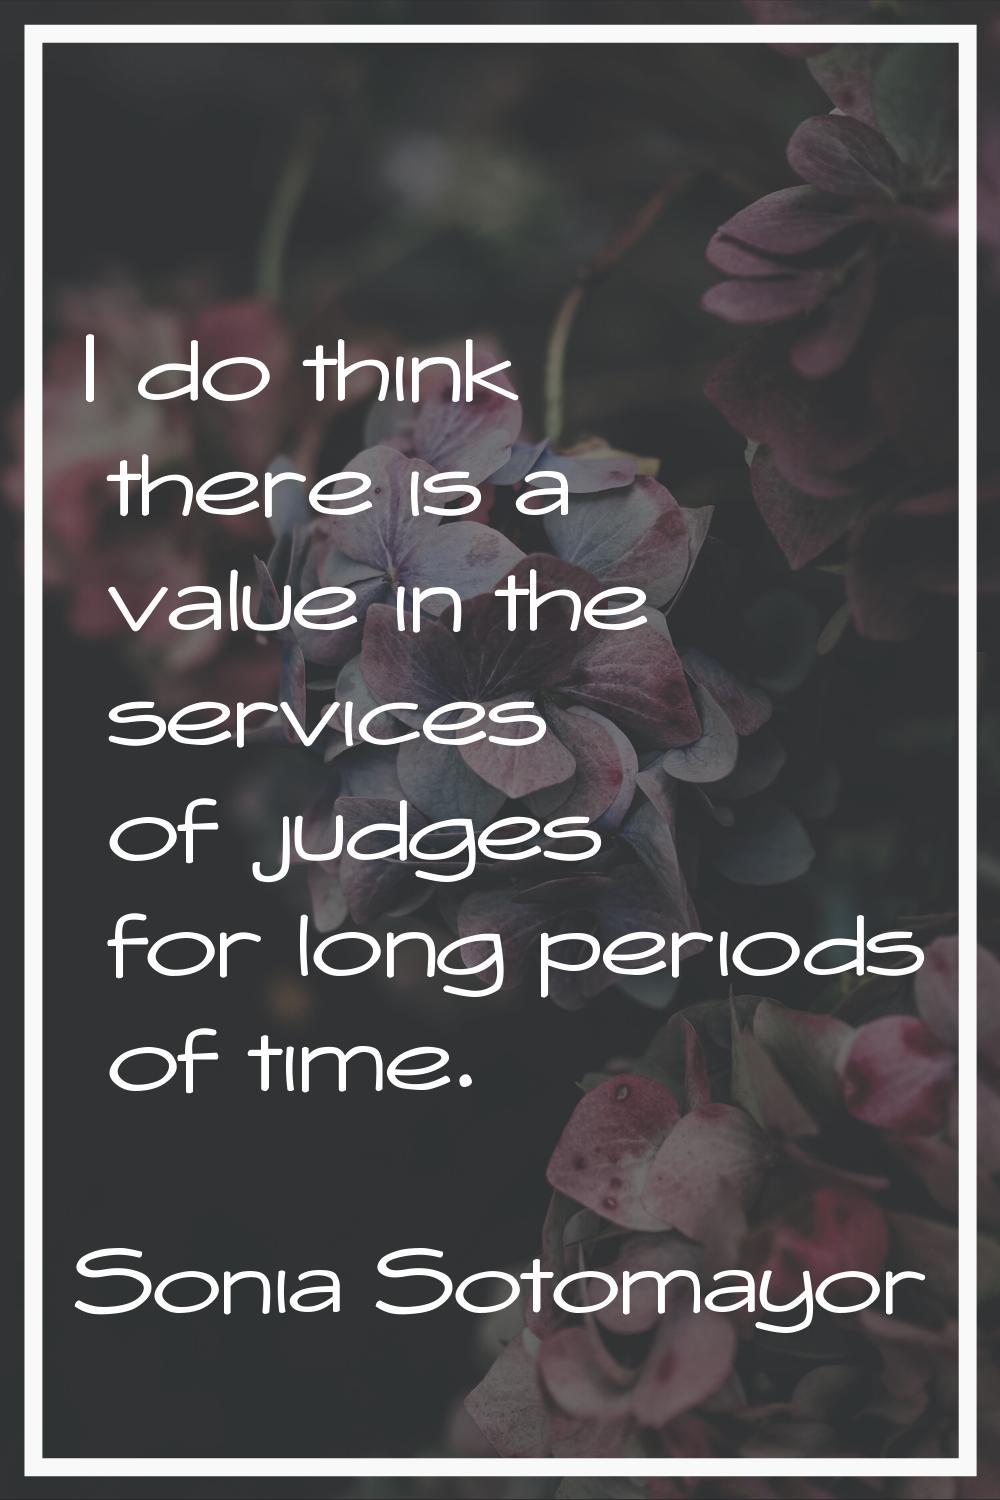 I do think there is a value in the services of judges for long periods of time.